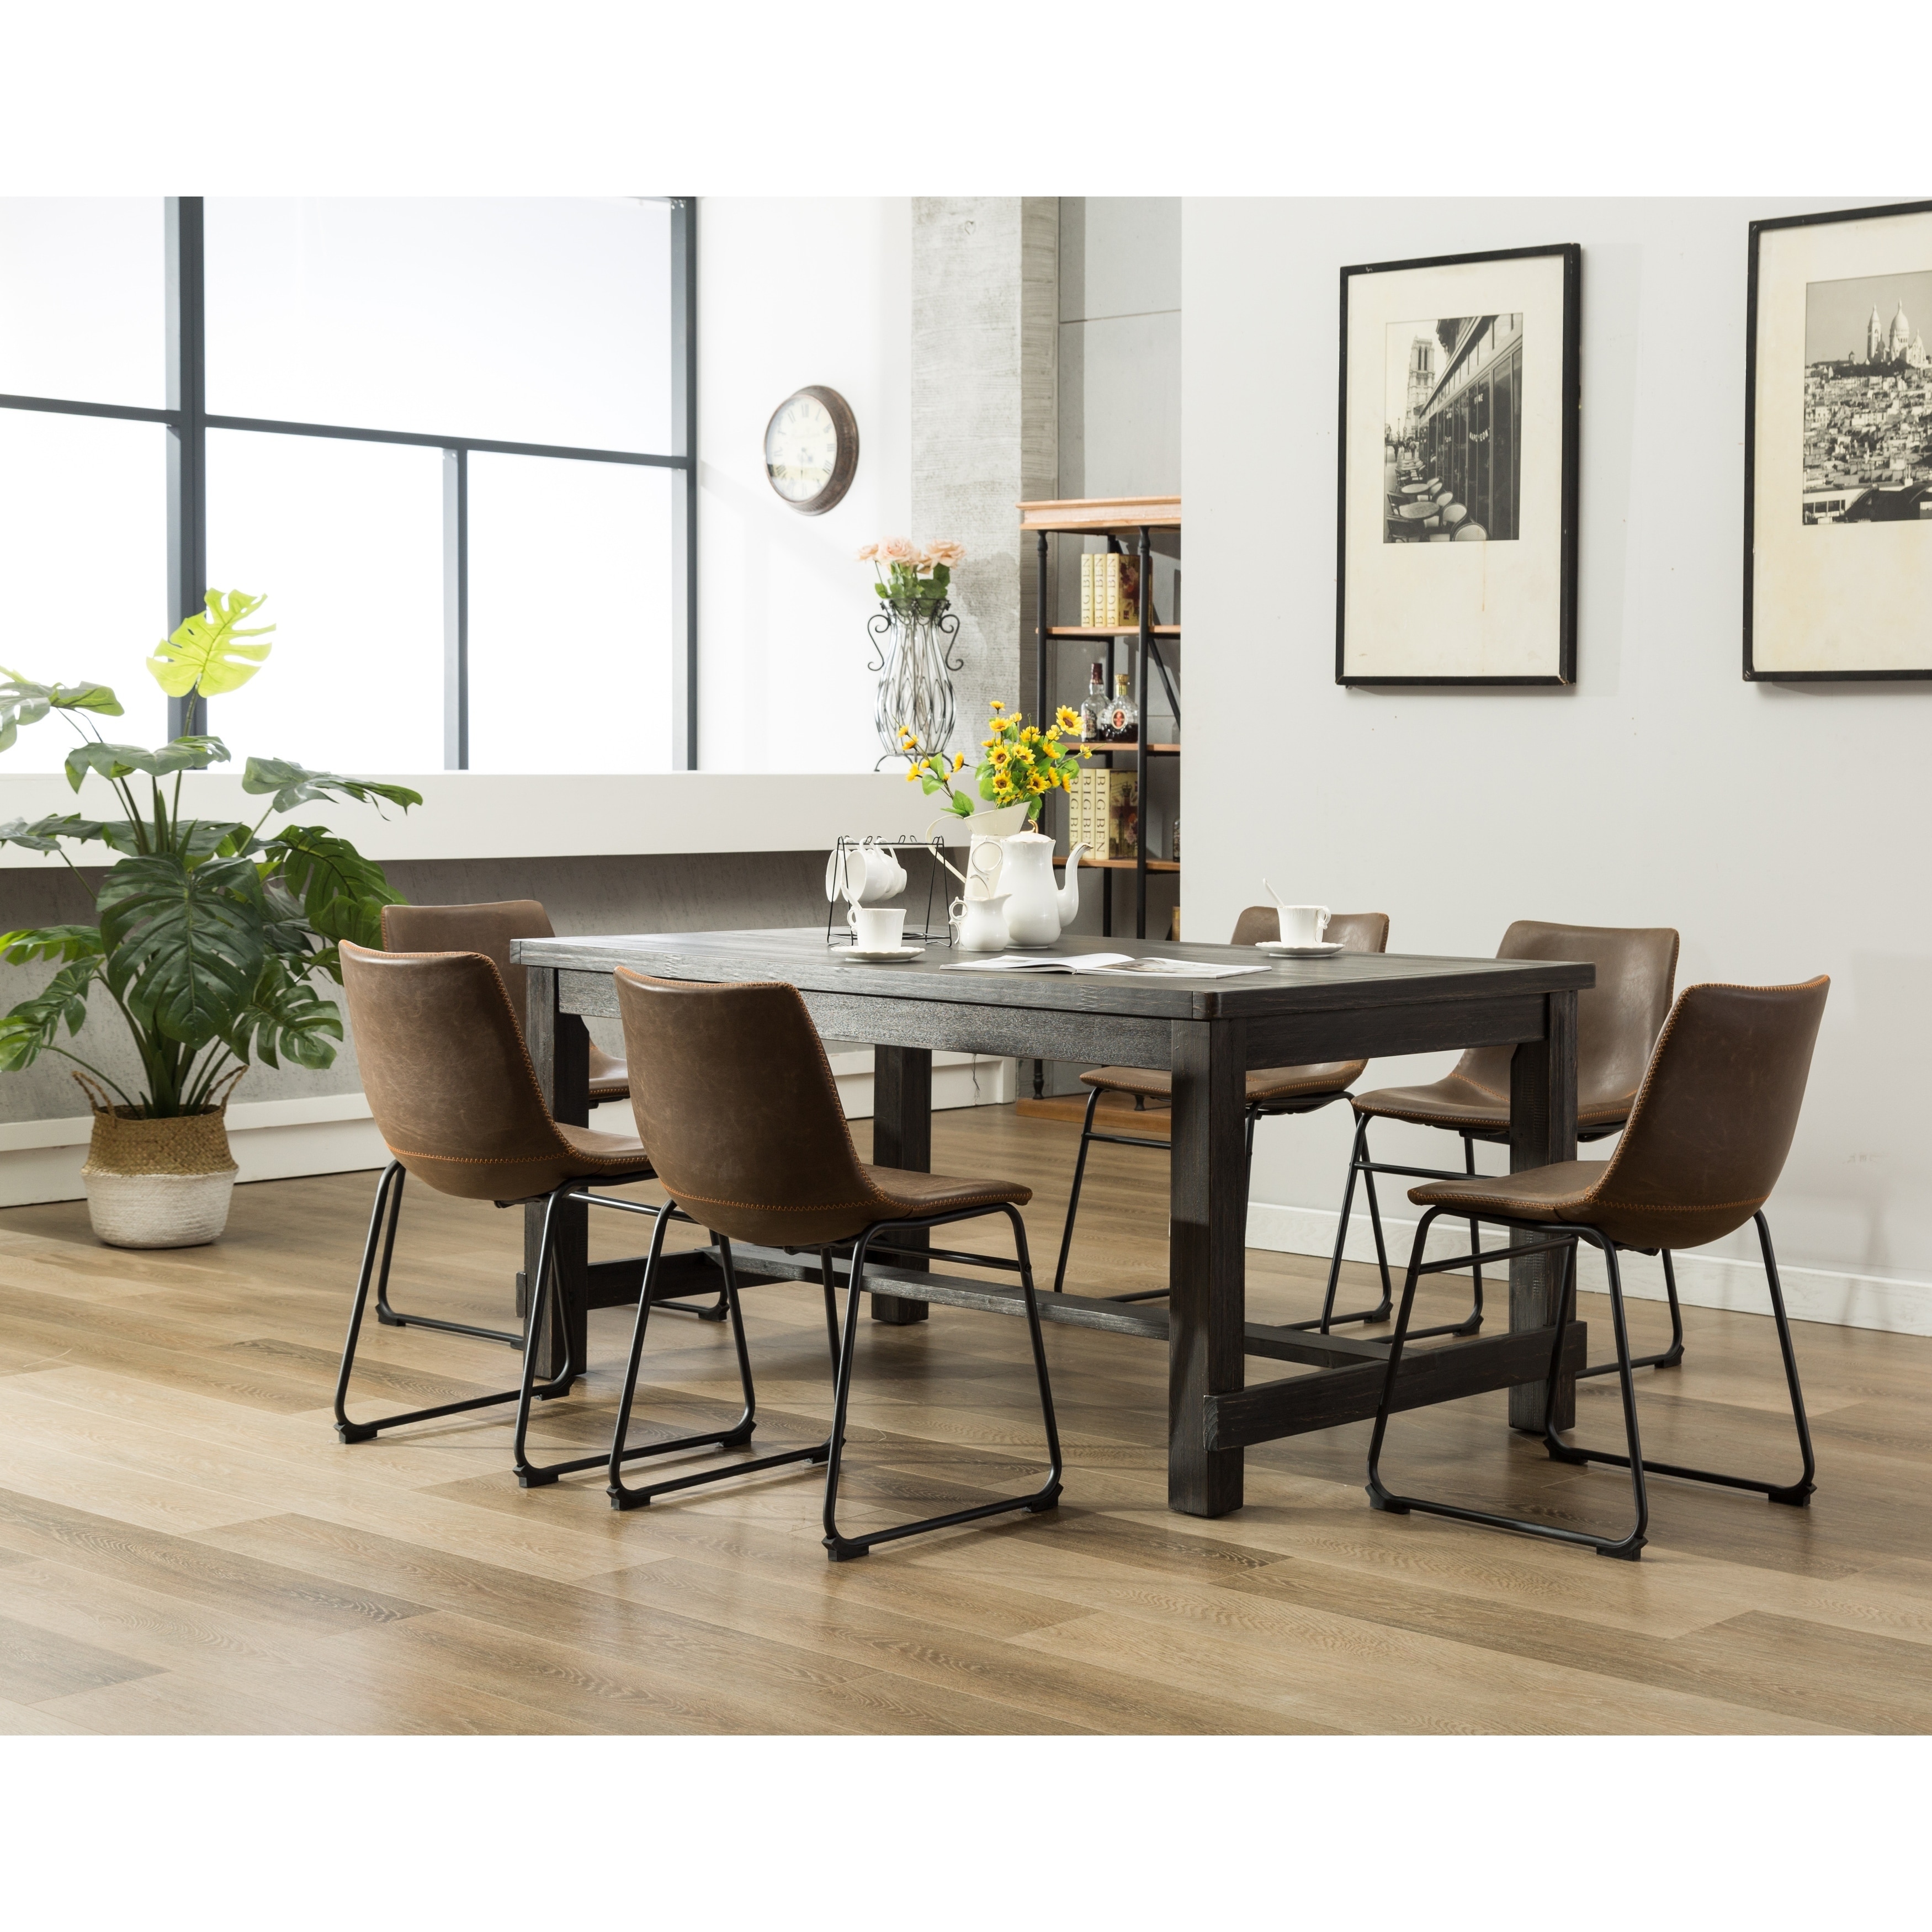 Lotusville 7 Pc Antique Black Dining Table W Faux Leather Chairs On Sale Overstock 19758685